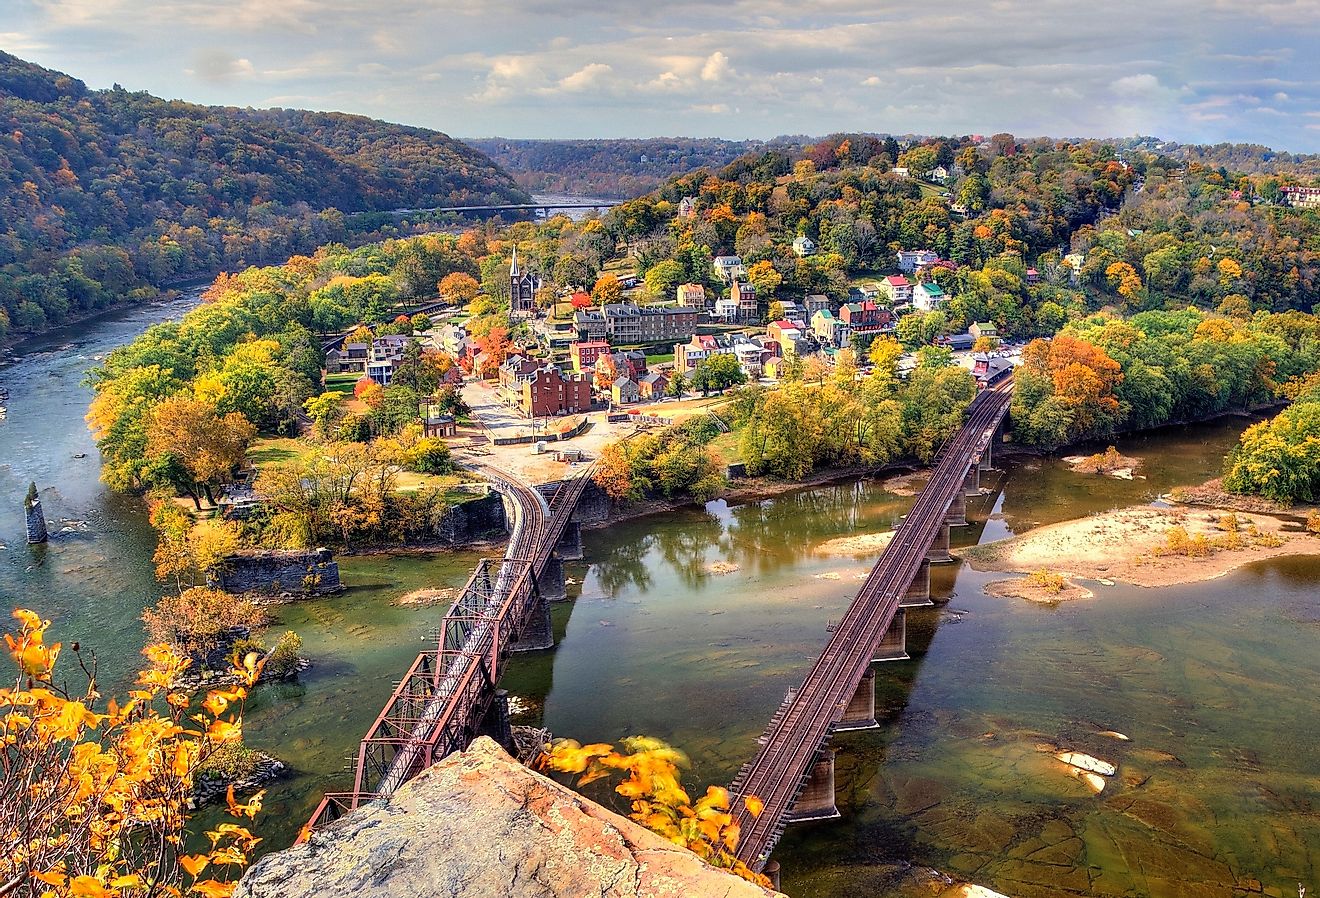 Harpers Ferry in West Virginia viewed from Maryland Heights during autumn. Image credit Kannan via AdobeStock.